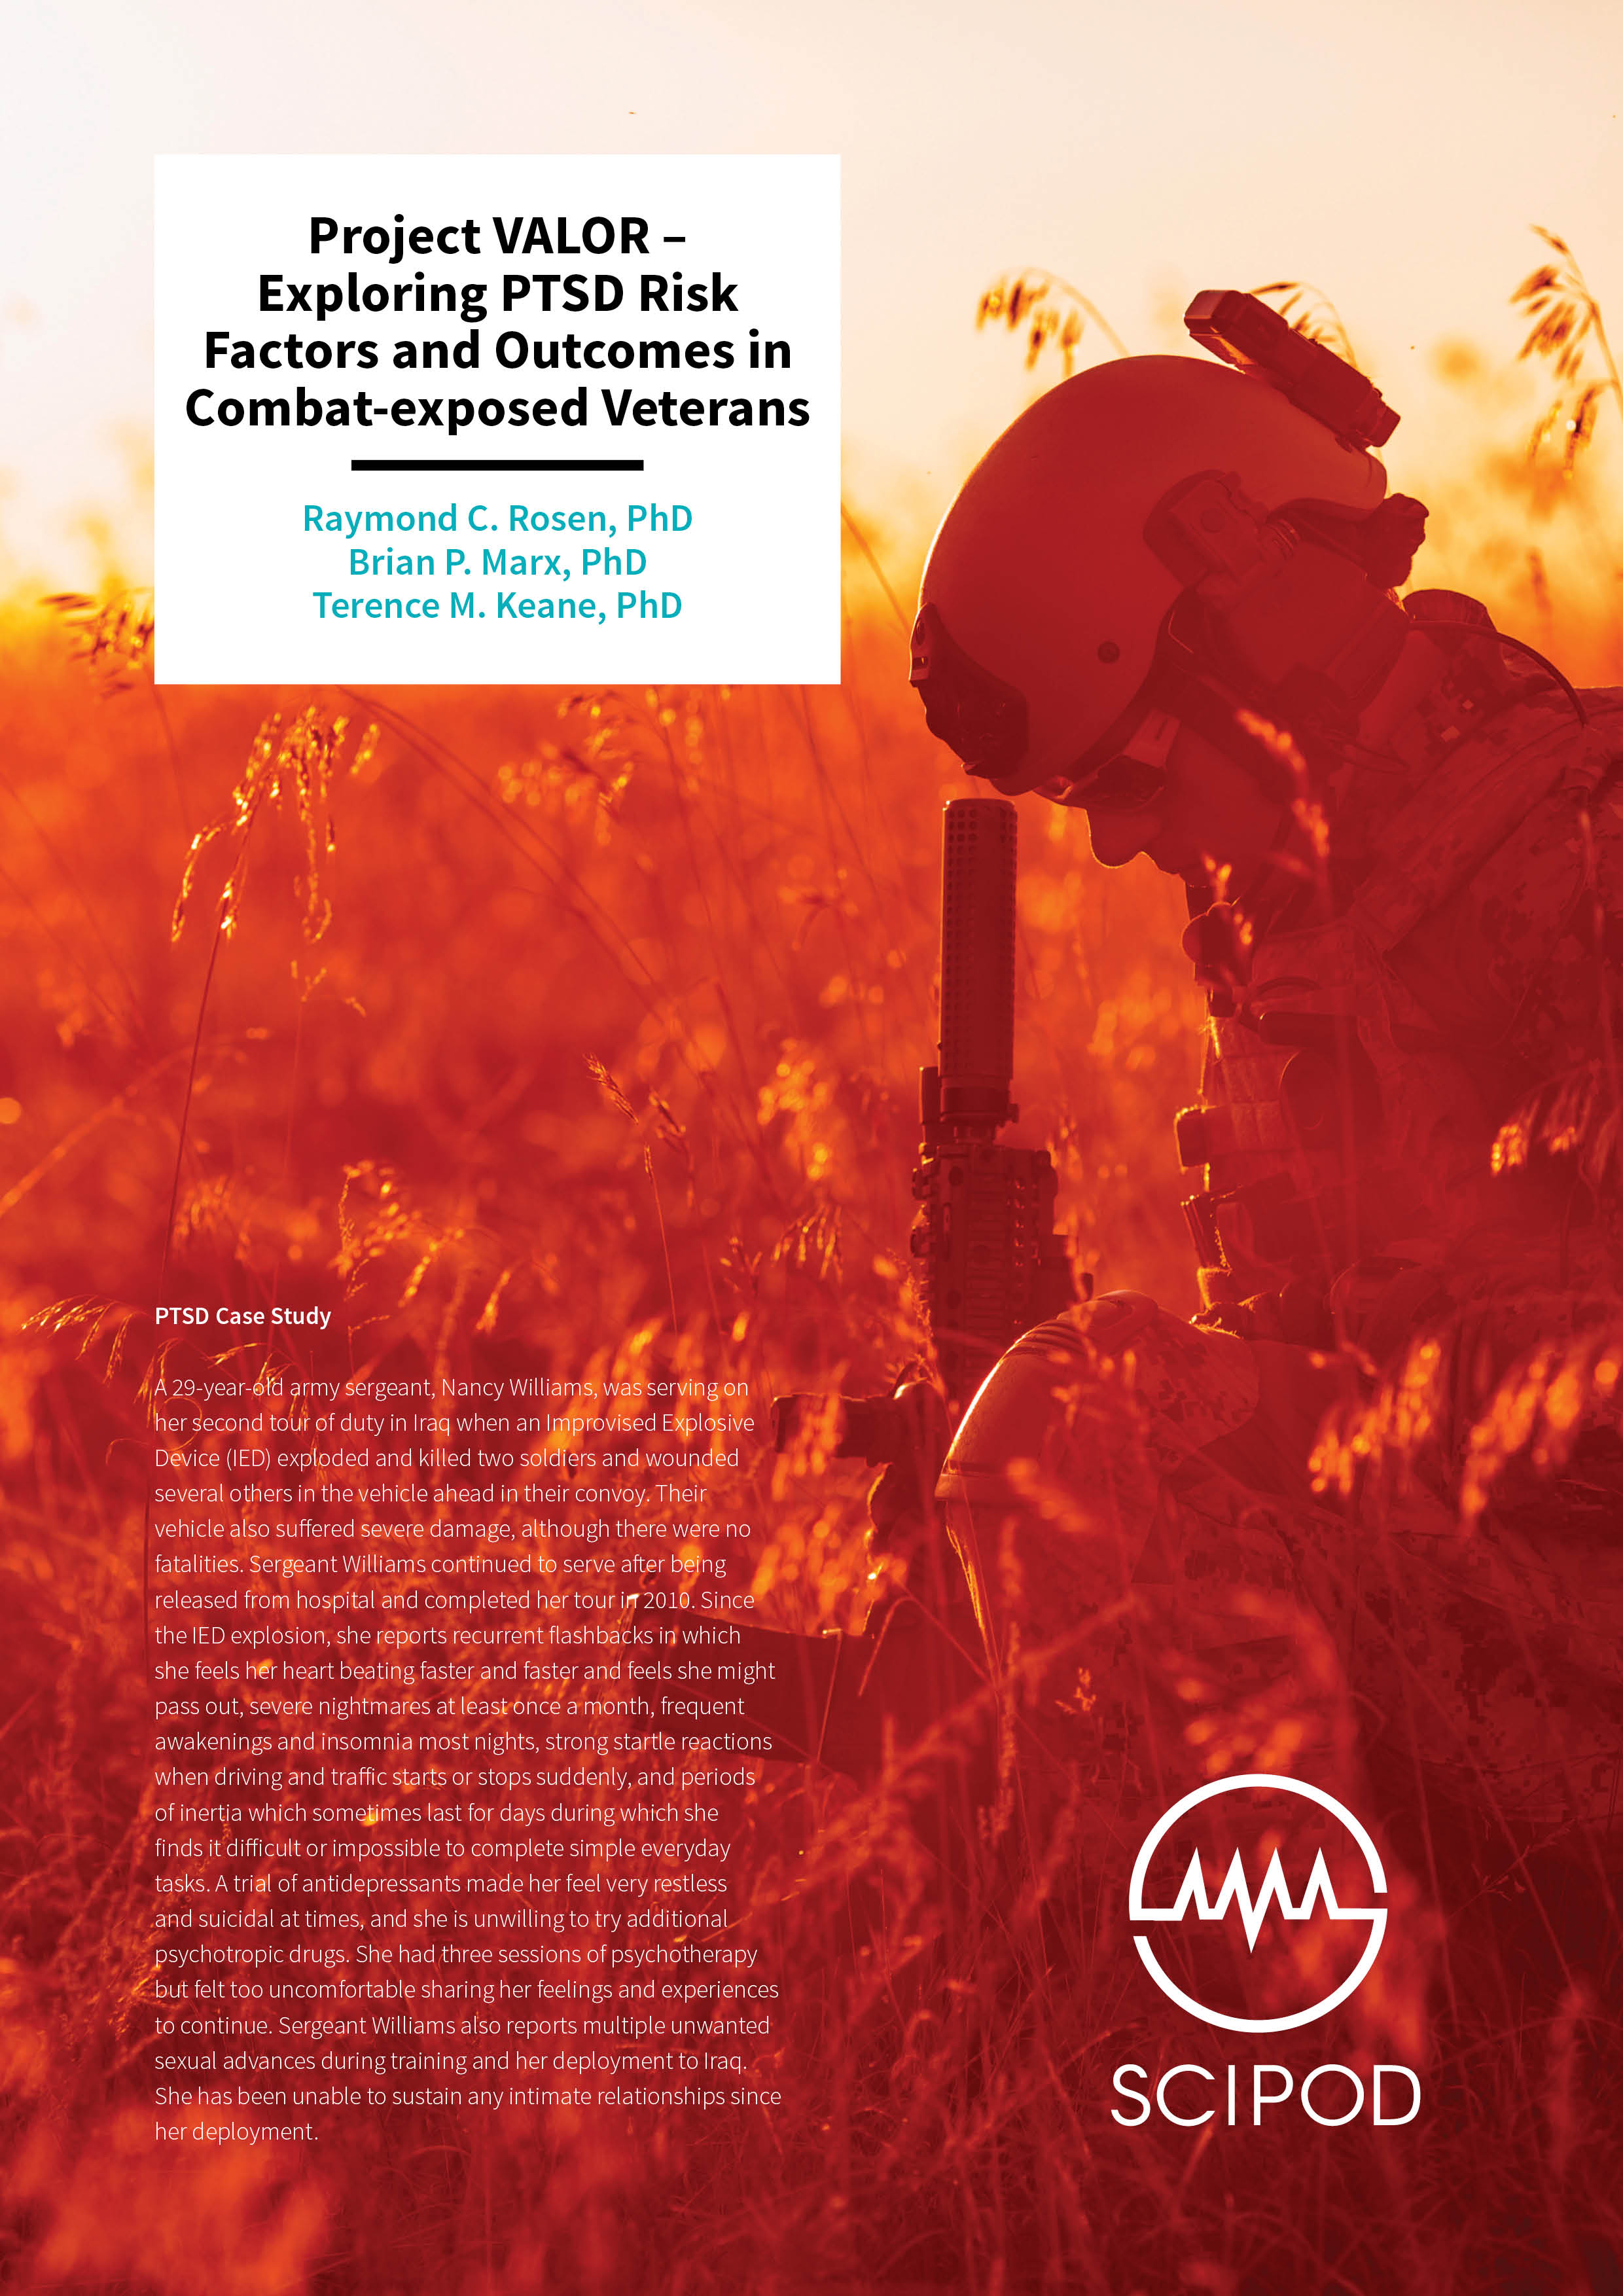 Project VALOR – Exploring PTSD Risk Factors and Outcomes in Combat-exposed Veterans